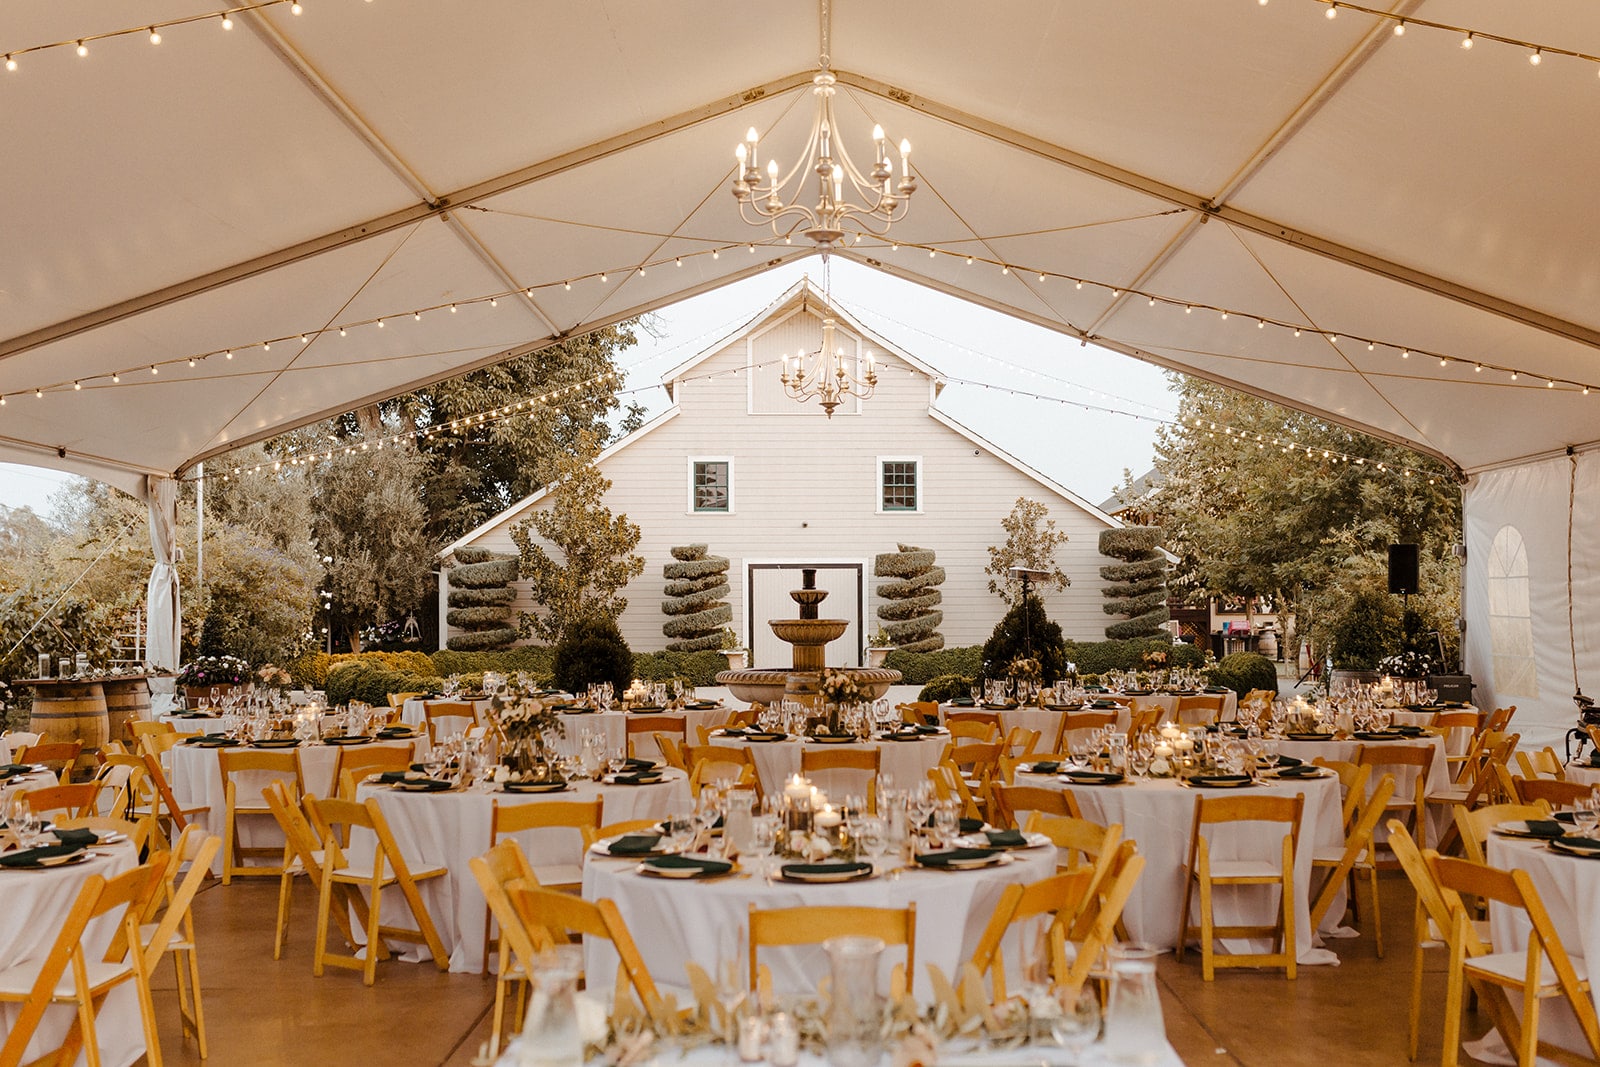 An outdoor wedding reception is set up under a tent strung with lights and a barn in the background.